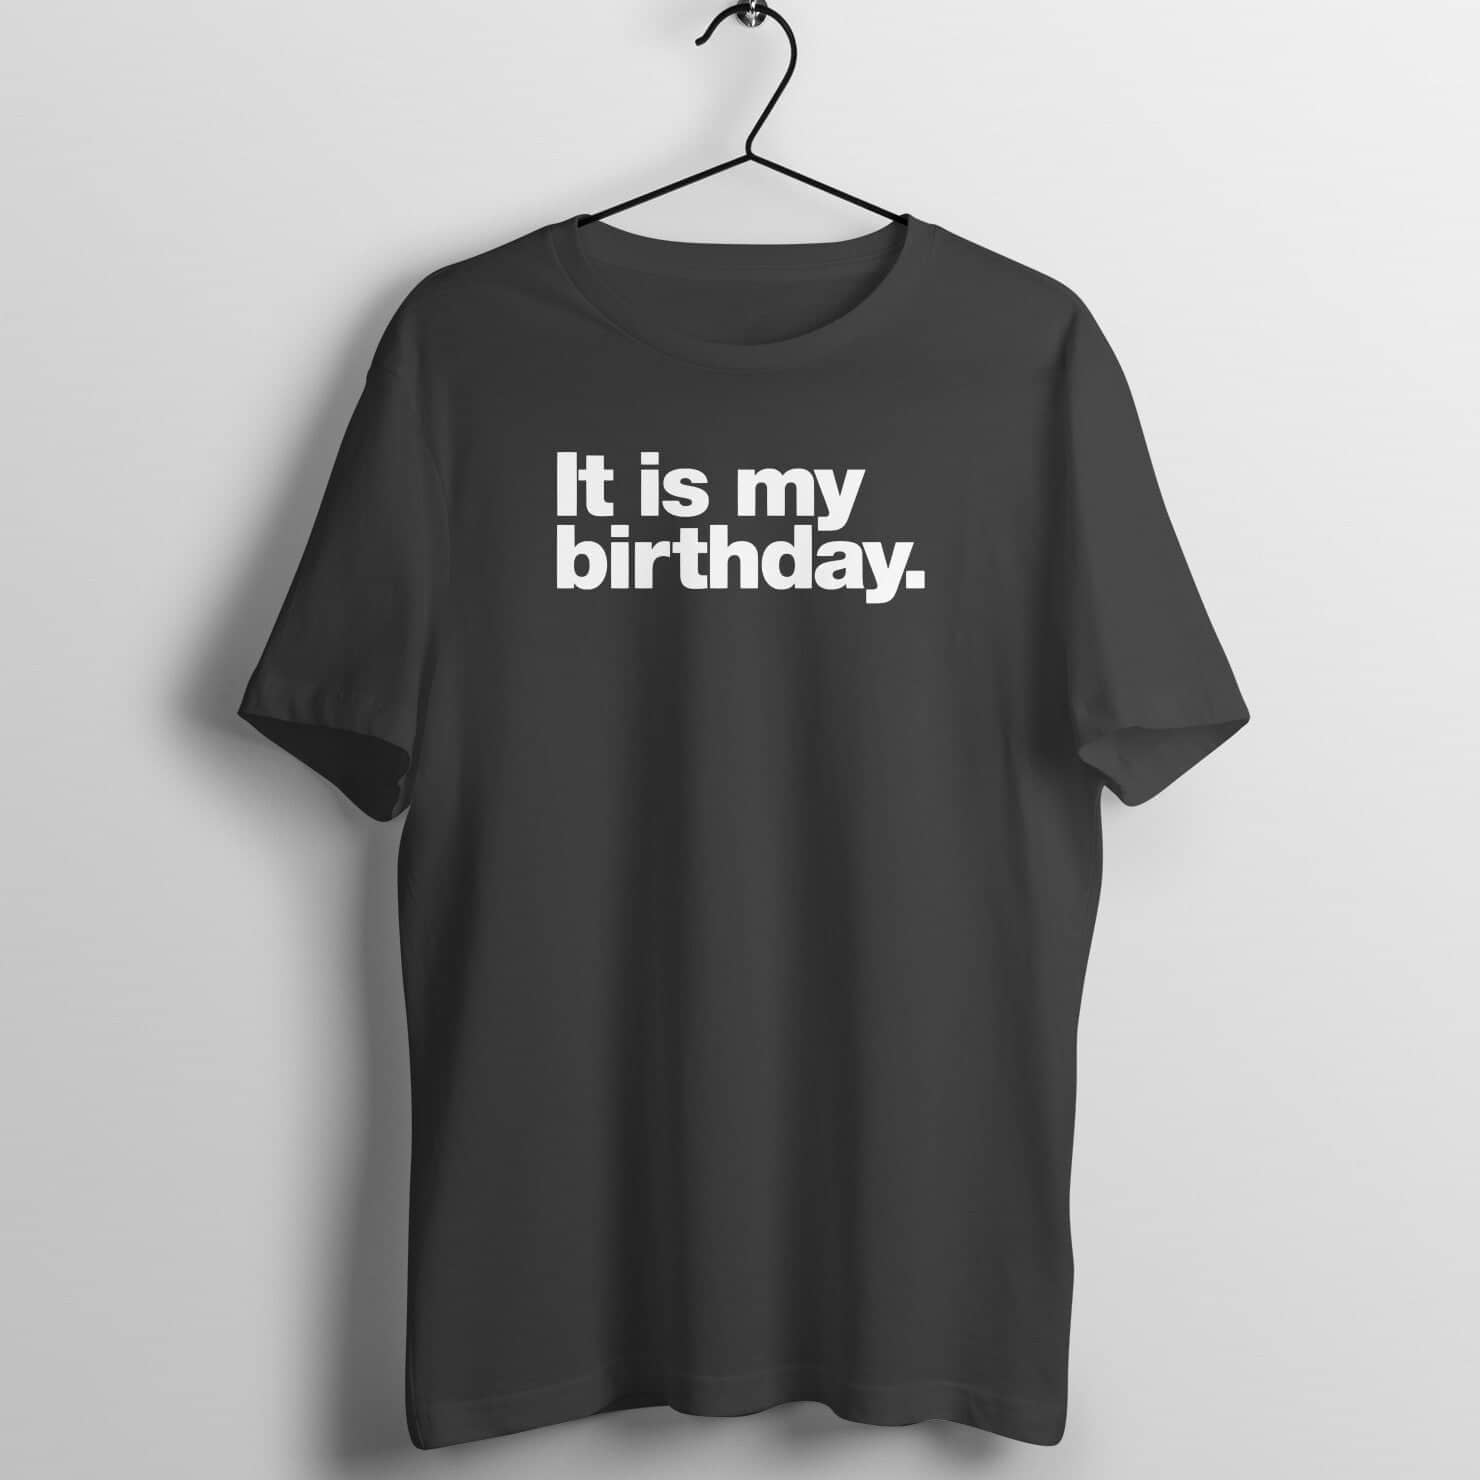 It Is My Birthday Exclusive Birthday Celebration T Shirt for Men and Women freeshipping - Catch My Drift India